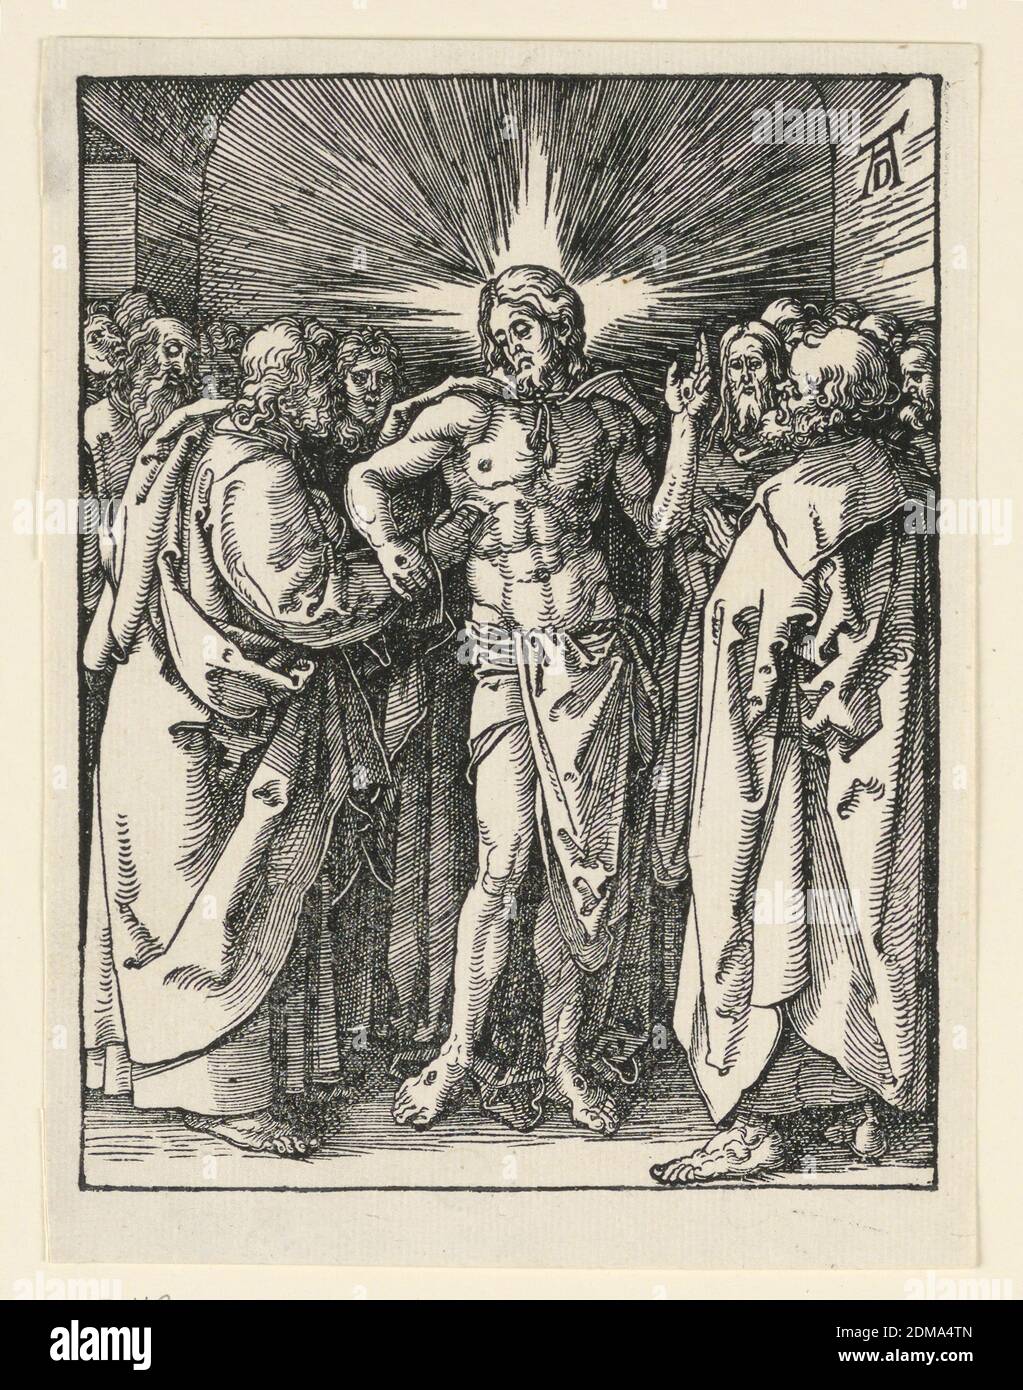 The Incredulity of Saint Thomas, from The Little Passion Series, Albrecht Dürer, German, 1471–1528, Woodcut on paper, Christ stands in the center of the composition, surrounded by the disciples. Saint Thomas places his fingers in the wound in the side of Christ, who supports this effort by steadying the Saint's wrist. Monogram of Dürer at upper right., Germany, ca. 1509–1511, Print Stock Photo